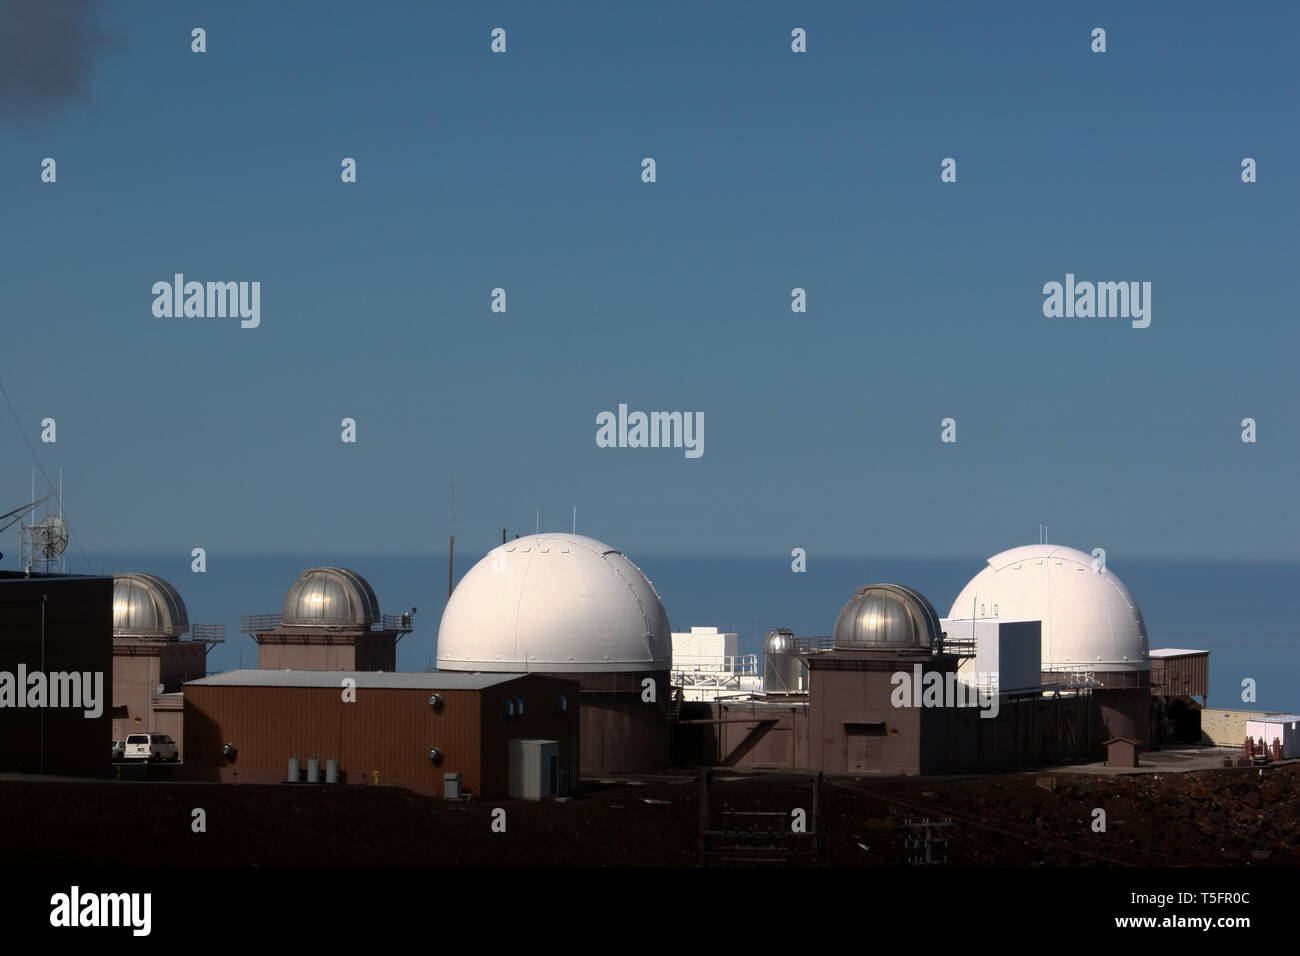 Pan-STARRS telescopes consists of astronomical cameras, telescopes and a computing facility that is surveying the sky for moving or variable objects. Stock Photo